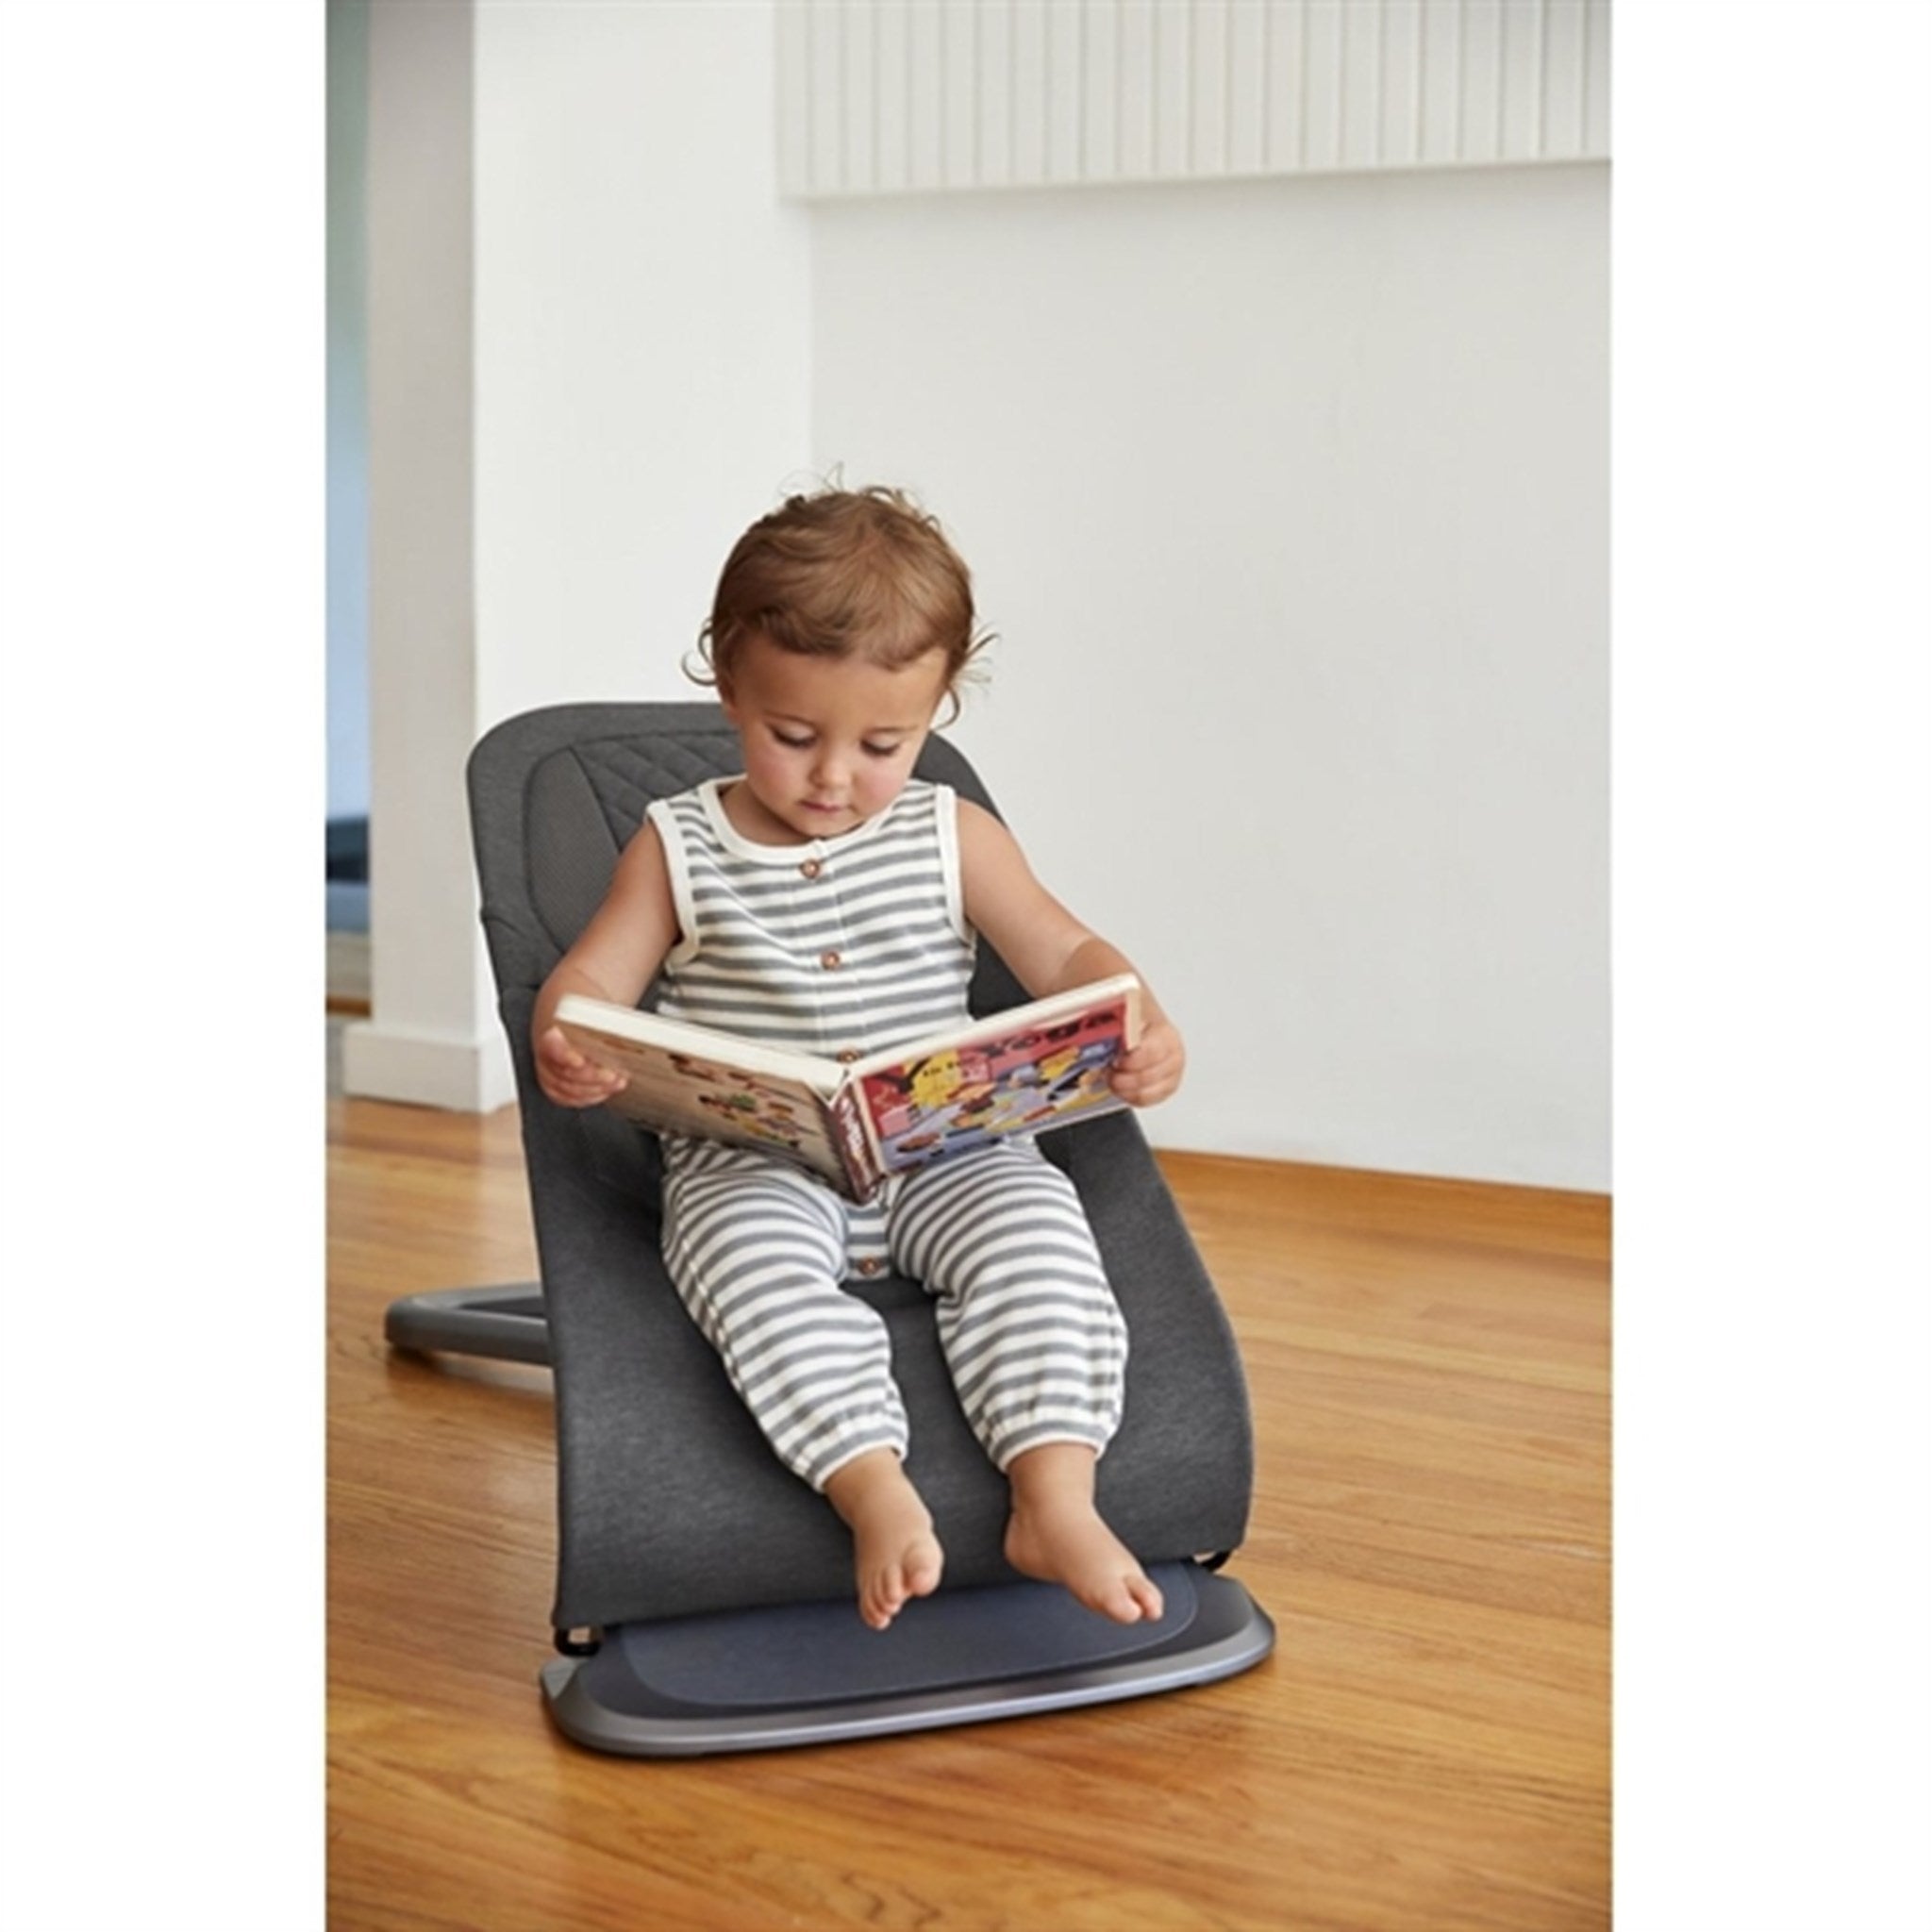 Ergobaby Evolve 3-in-1 Bouncer Charcoal Grey 2